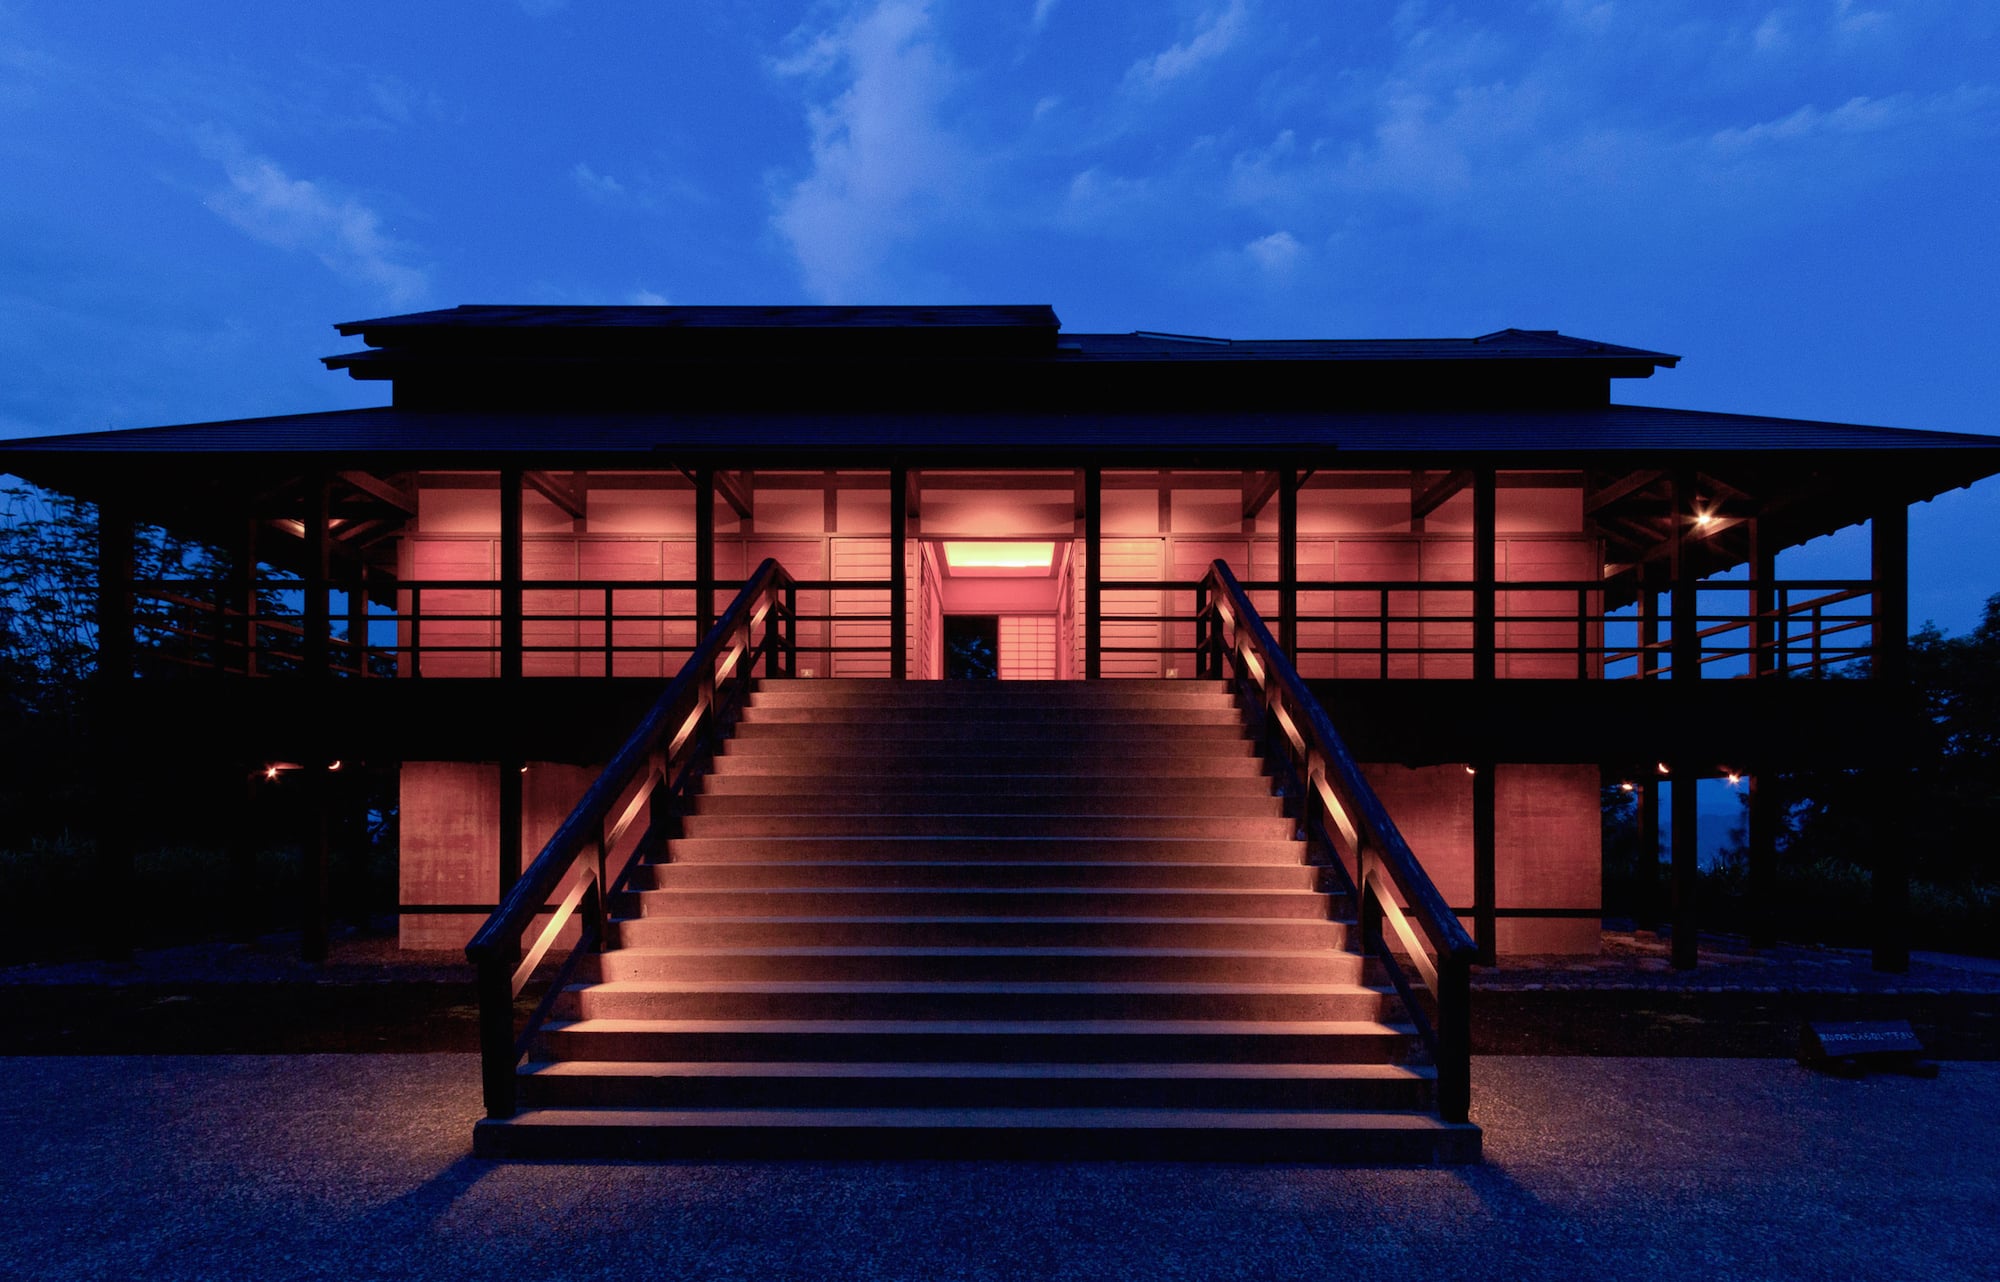 The House of Light in Niigata, Japan, has a Skyspace by James Turrell. Photo by Tsutomu Yamada